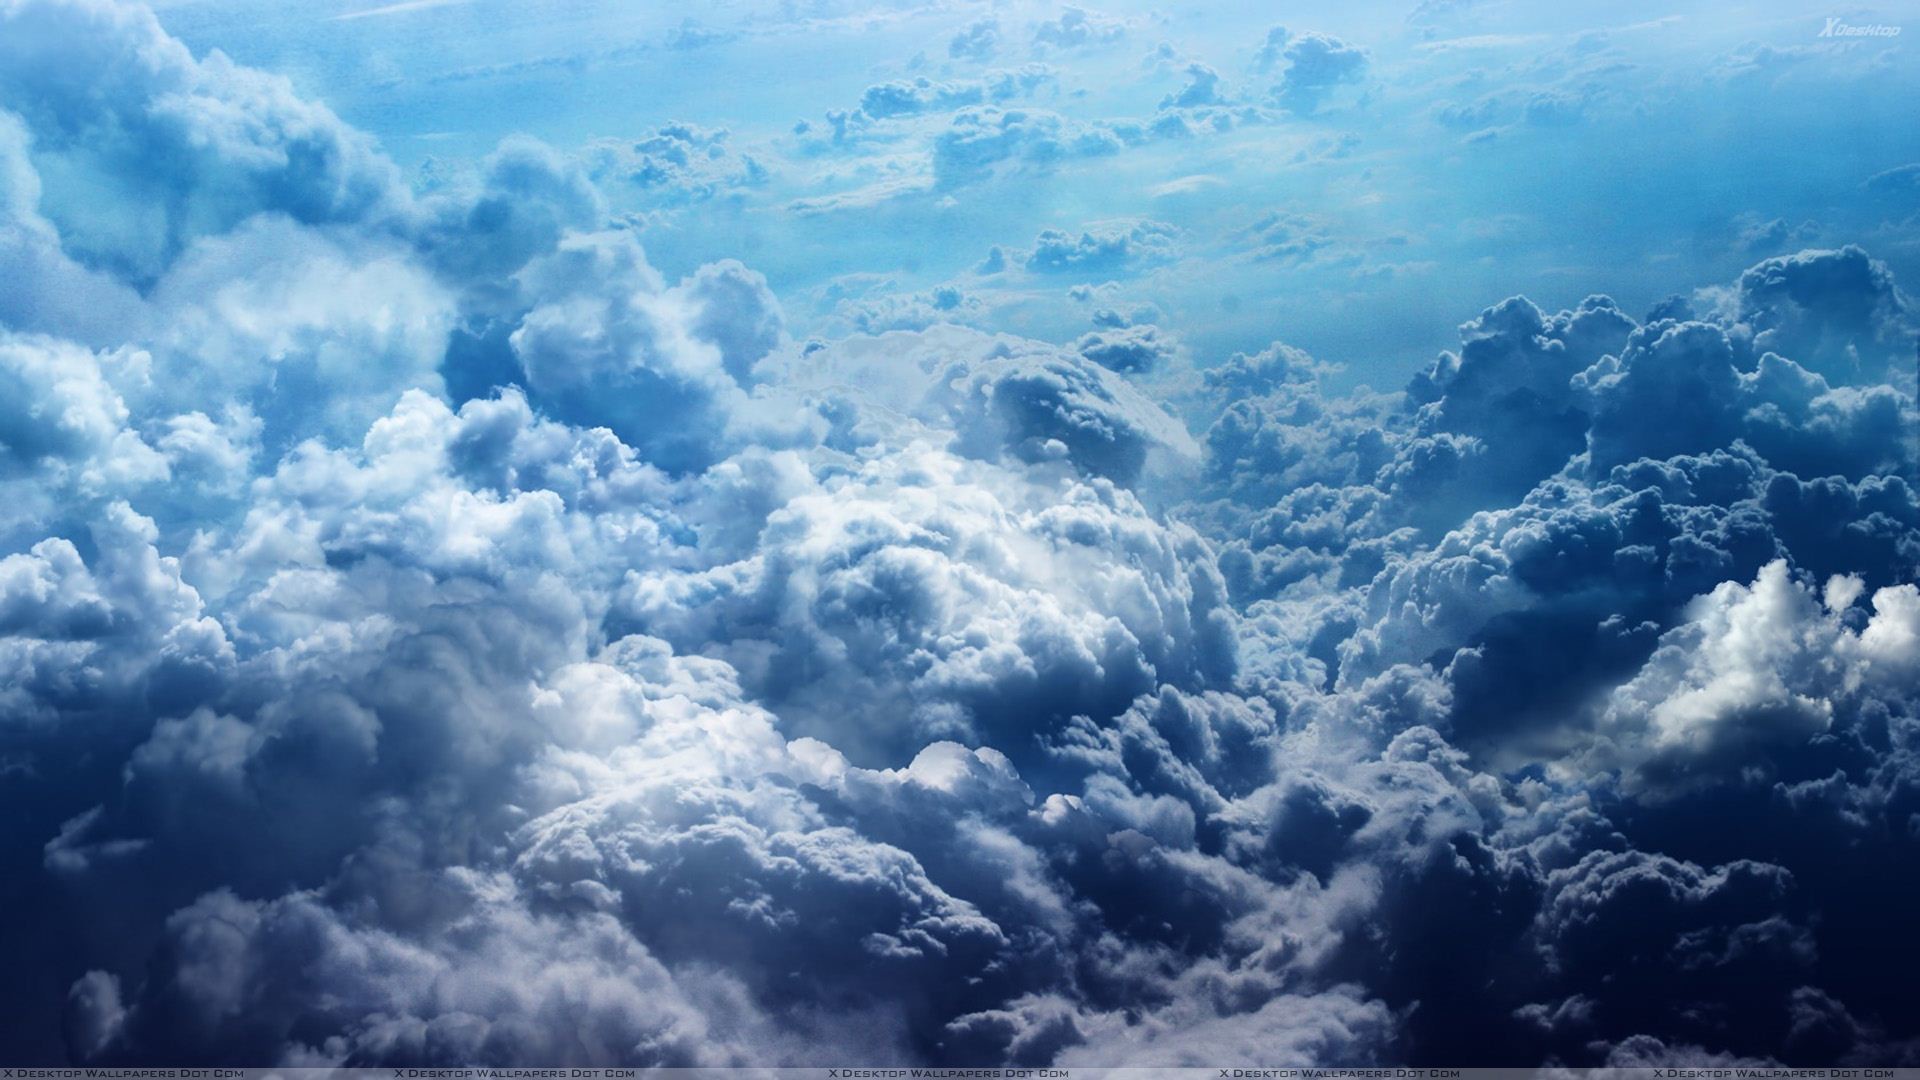 1920x1080 You are viewing wallpaper titled "Beautiful Scene Of Blue Clouds" ...